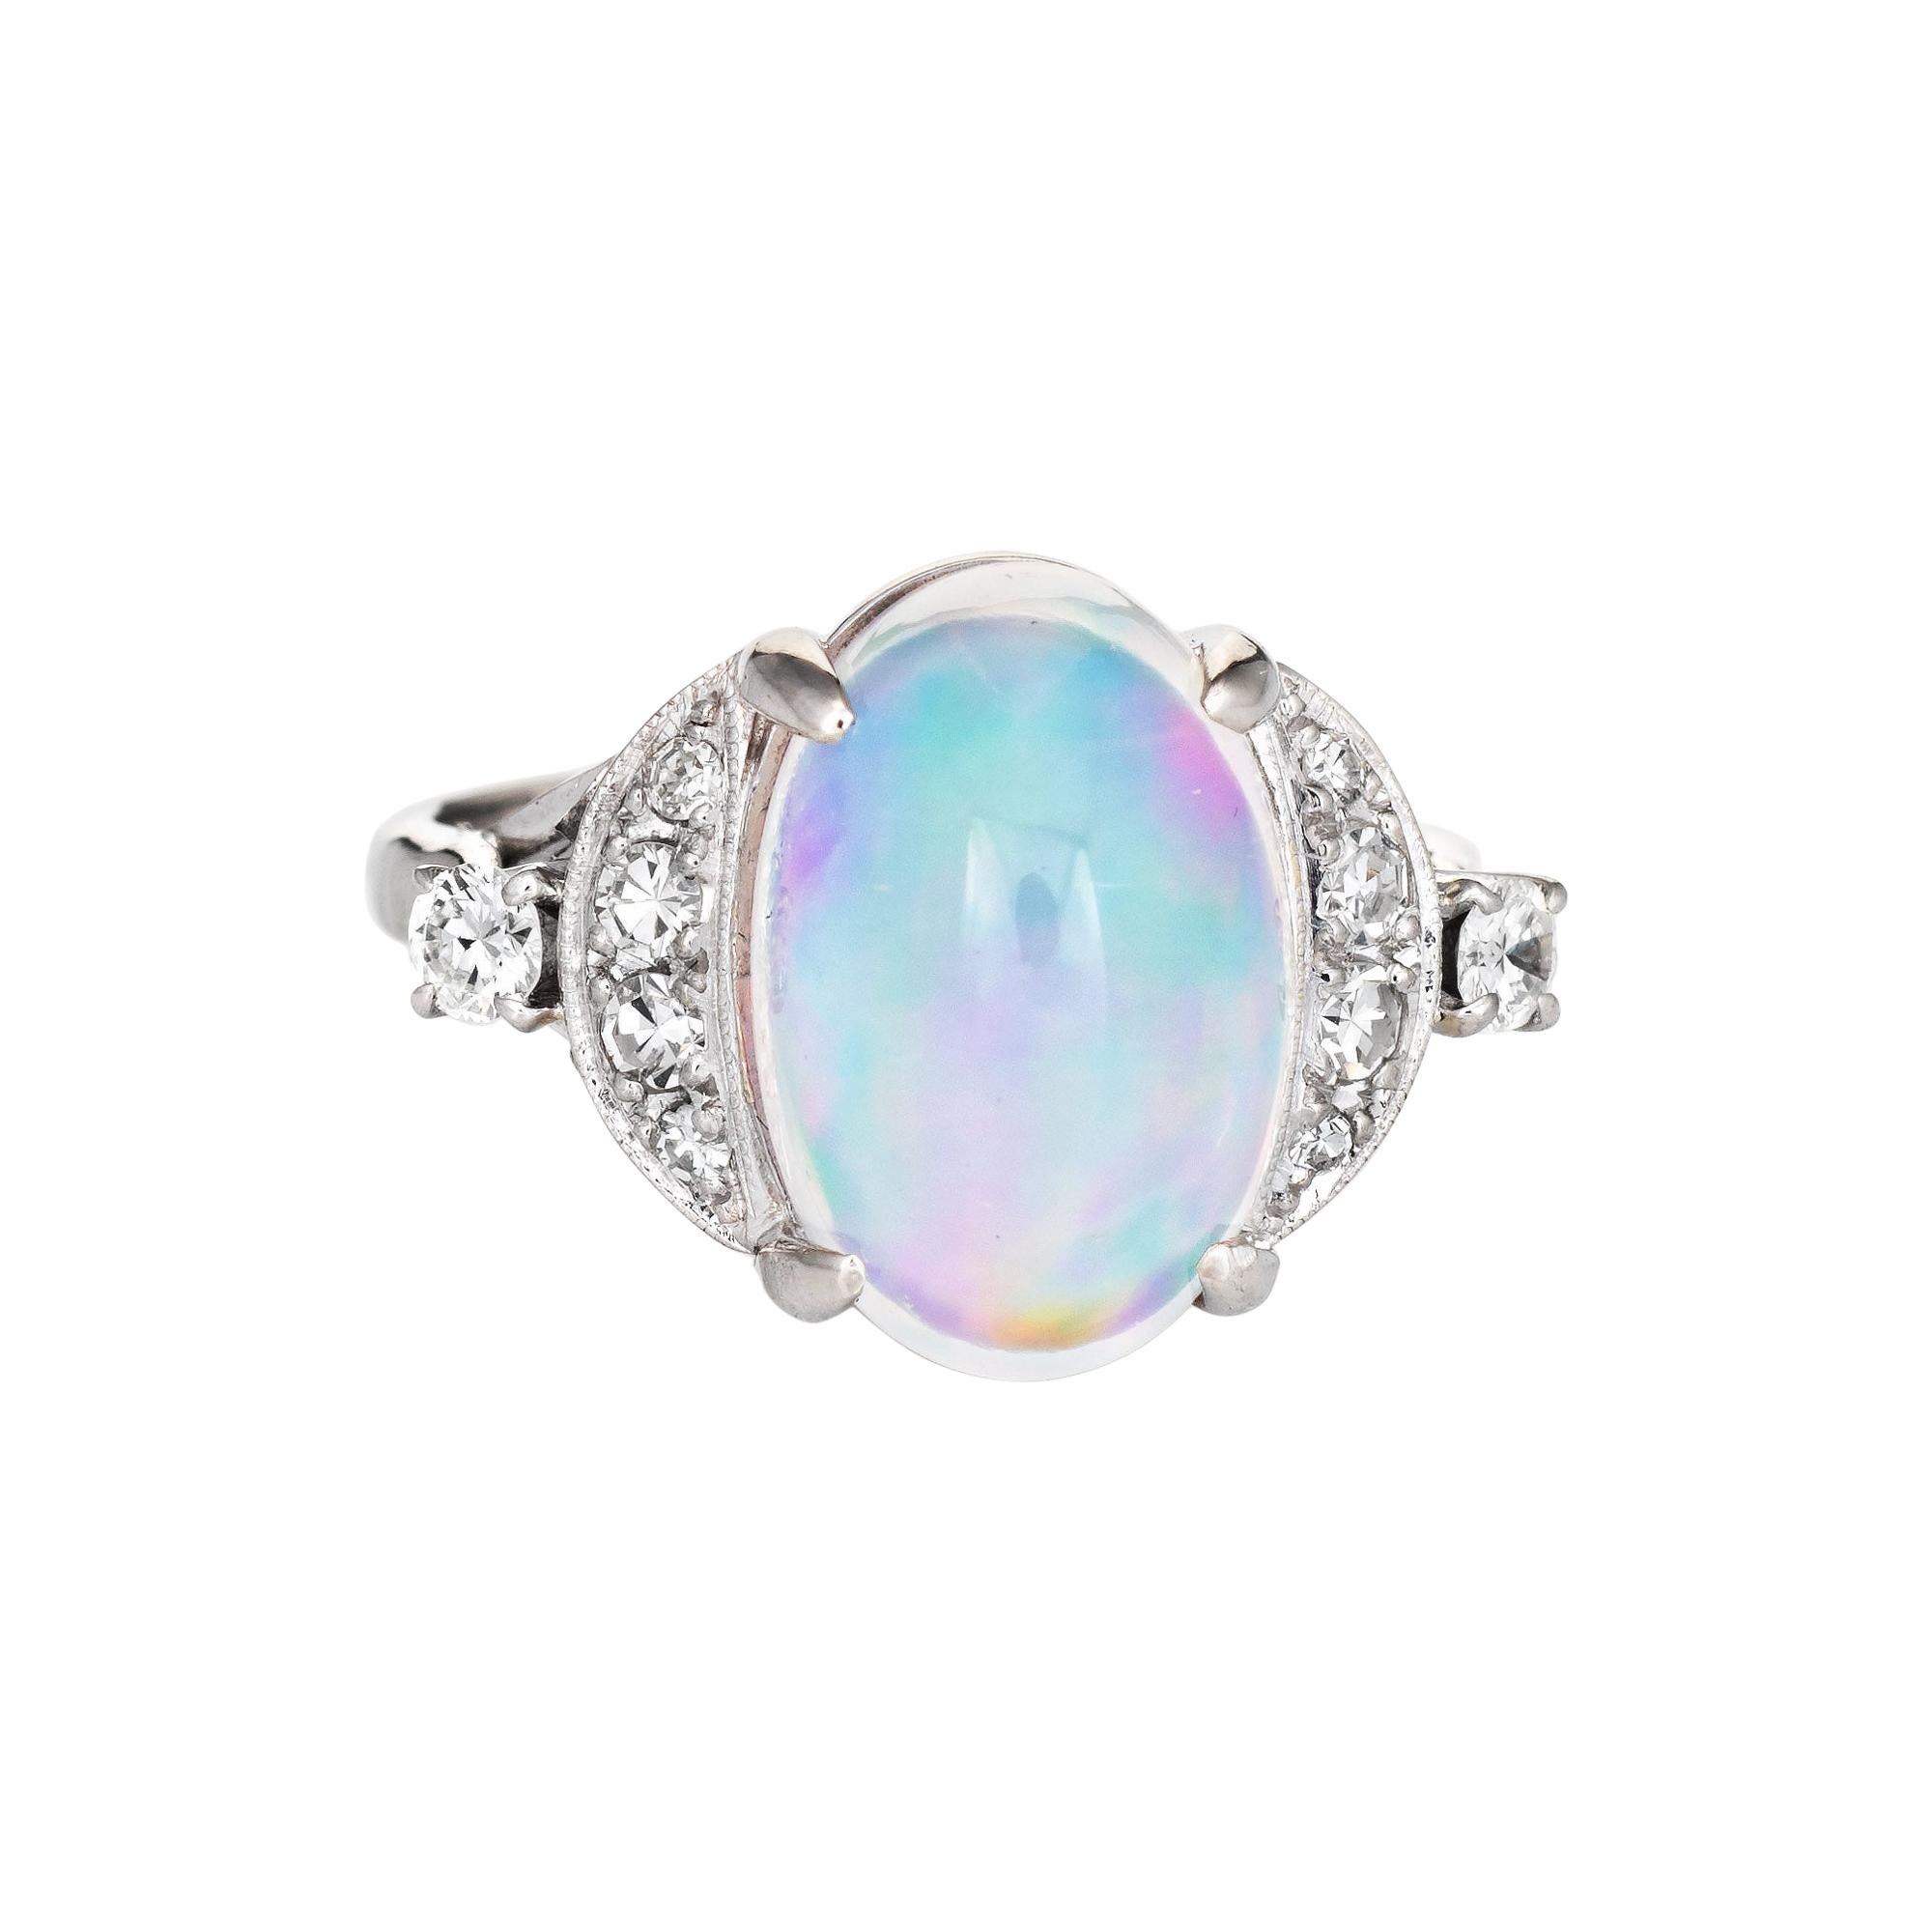 4.92ct Natural Jelly Opal Diamond Ring Platinum Estate Fine Jewelry For Sale